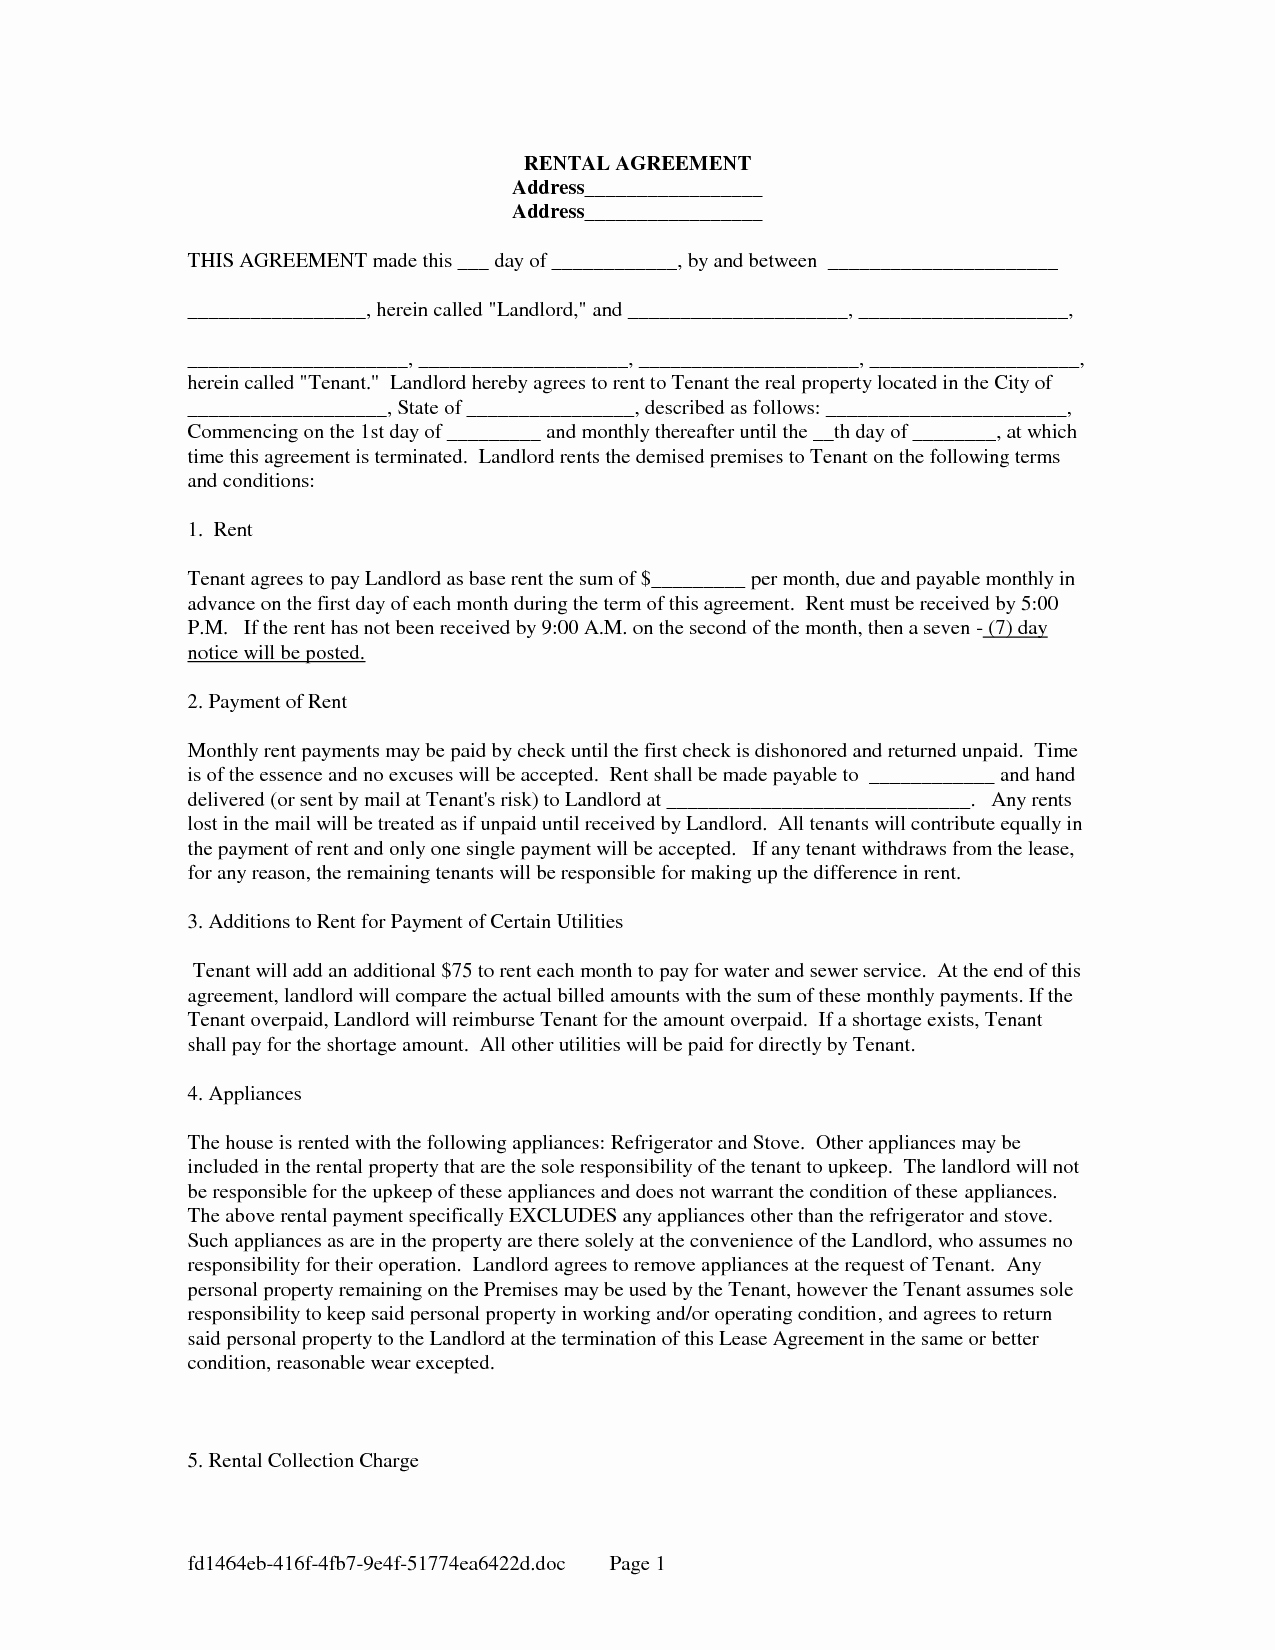 Car Payment Contract Template New Car Payment Agreement Template – 2011 Requirements for